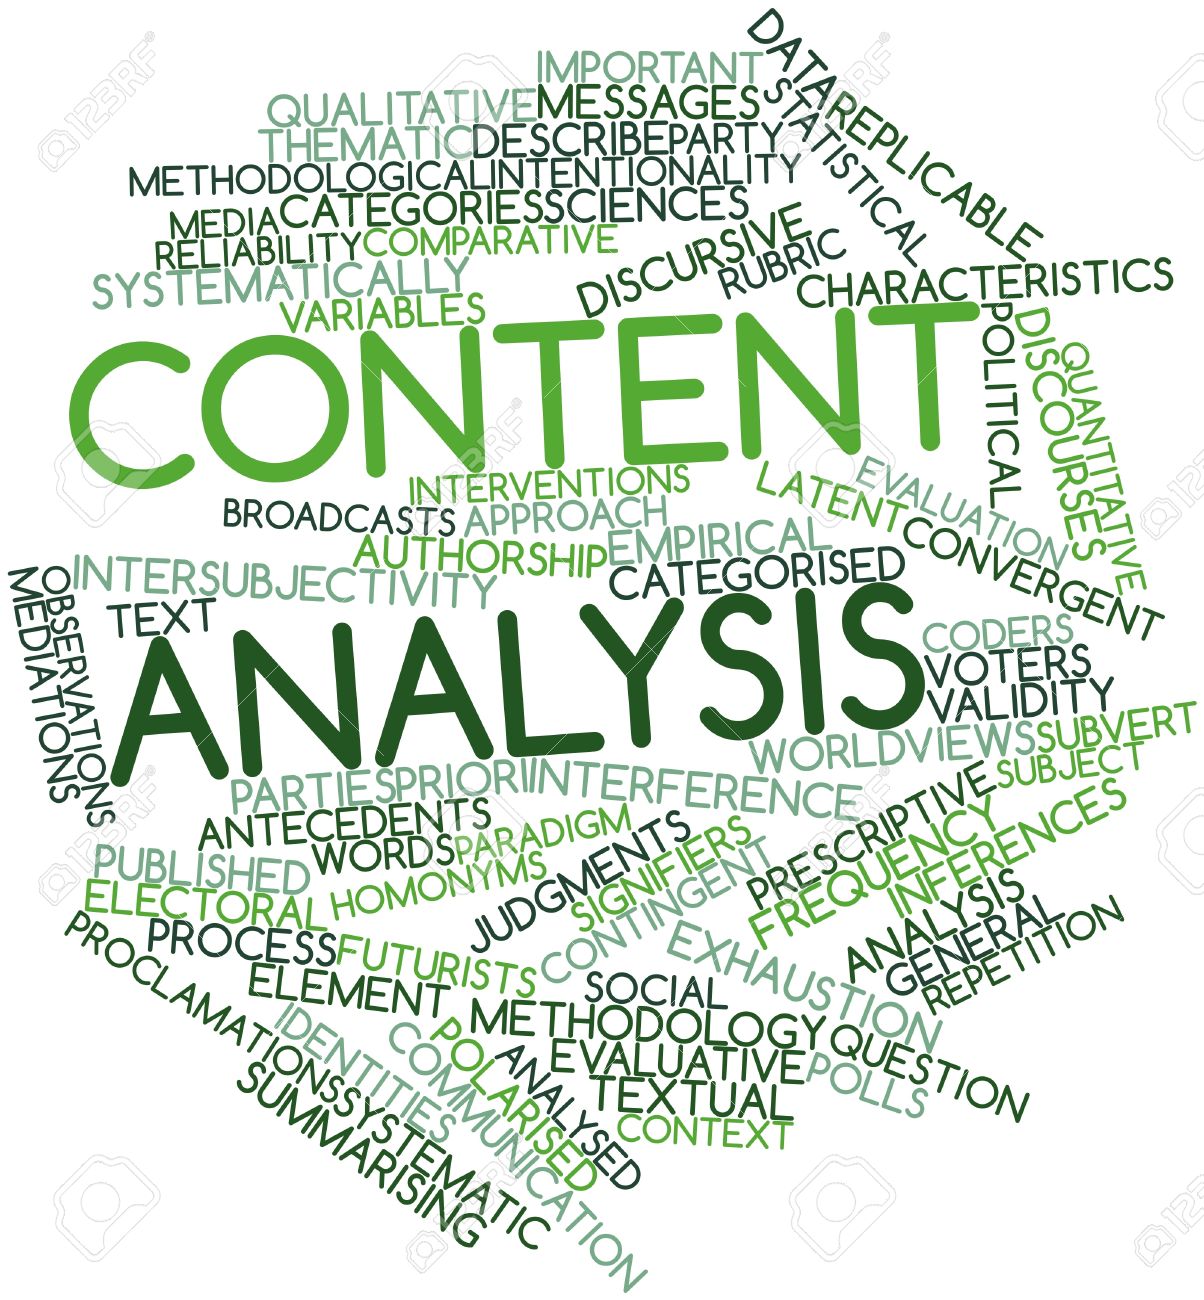 (http://previews.123rf.com/images/radiantskies/radiantskies1212/radiantskies121200252/16633019-Abstract-word-cloud-for-Content-analysis-with-related-tags-and-terms-Stock-Photo.jpg)